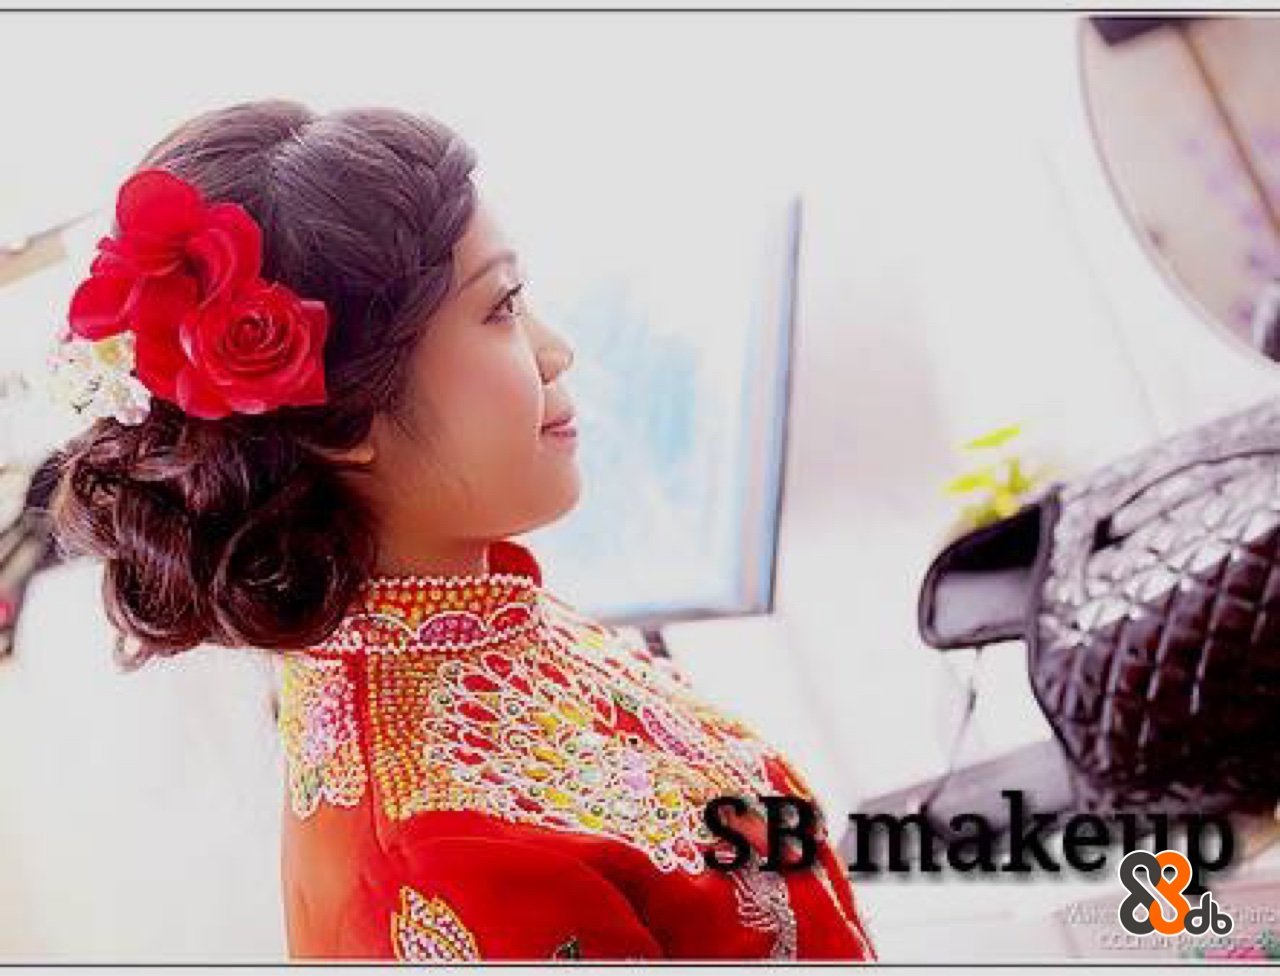  Hair,Hairstyle,Beauty,Tradition,Bride